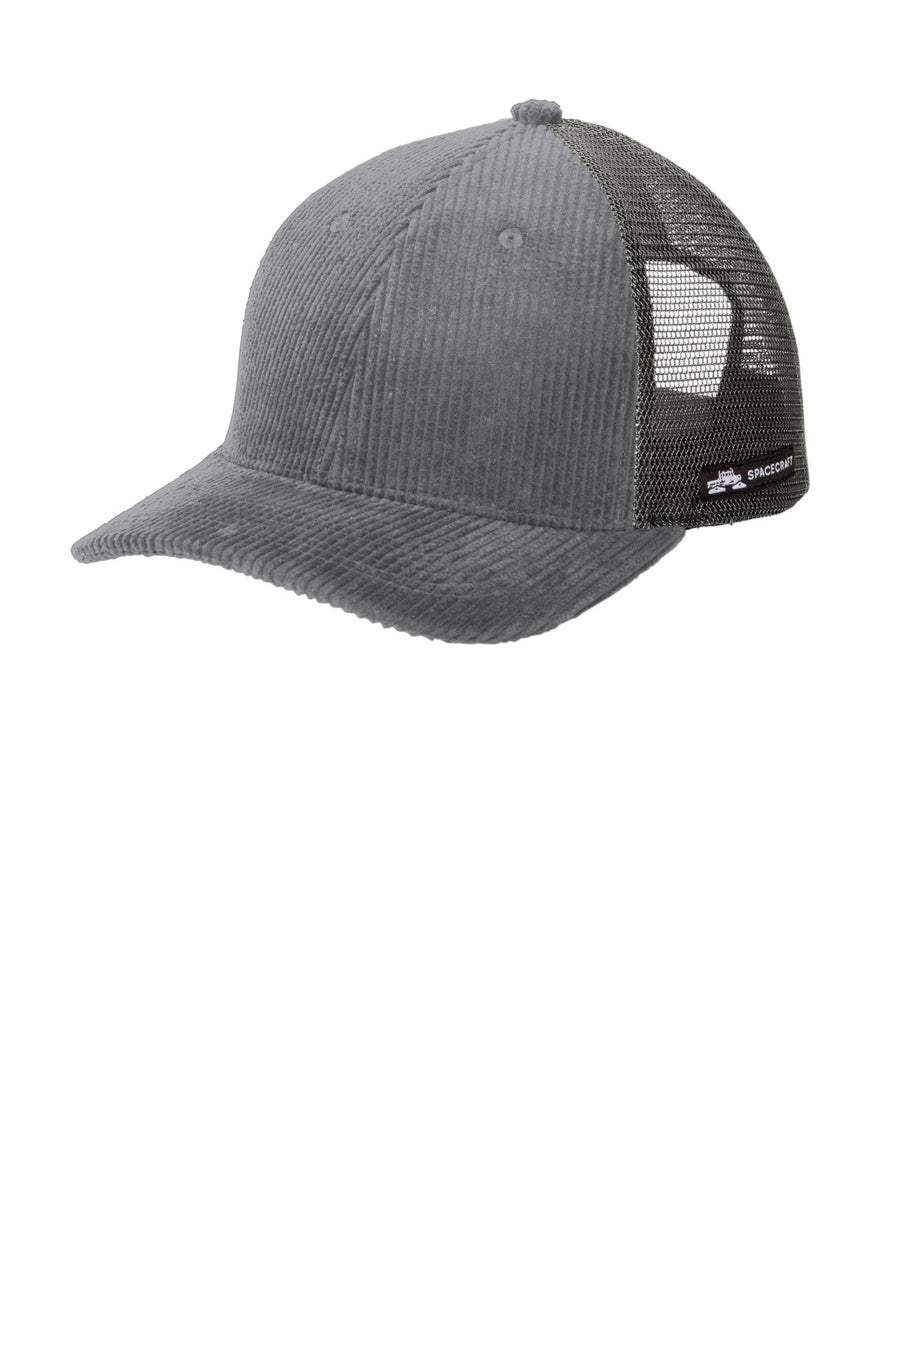 SPC1-Charcoal Gray/ Gray-front_flat